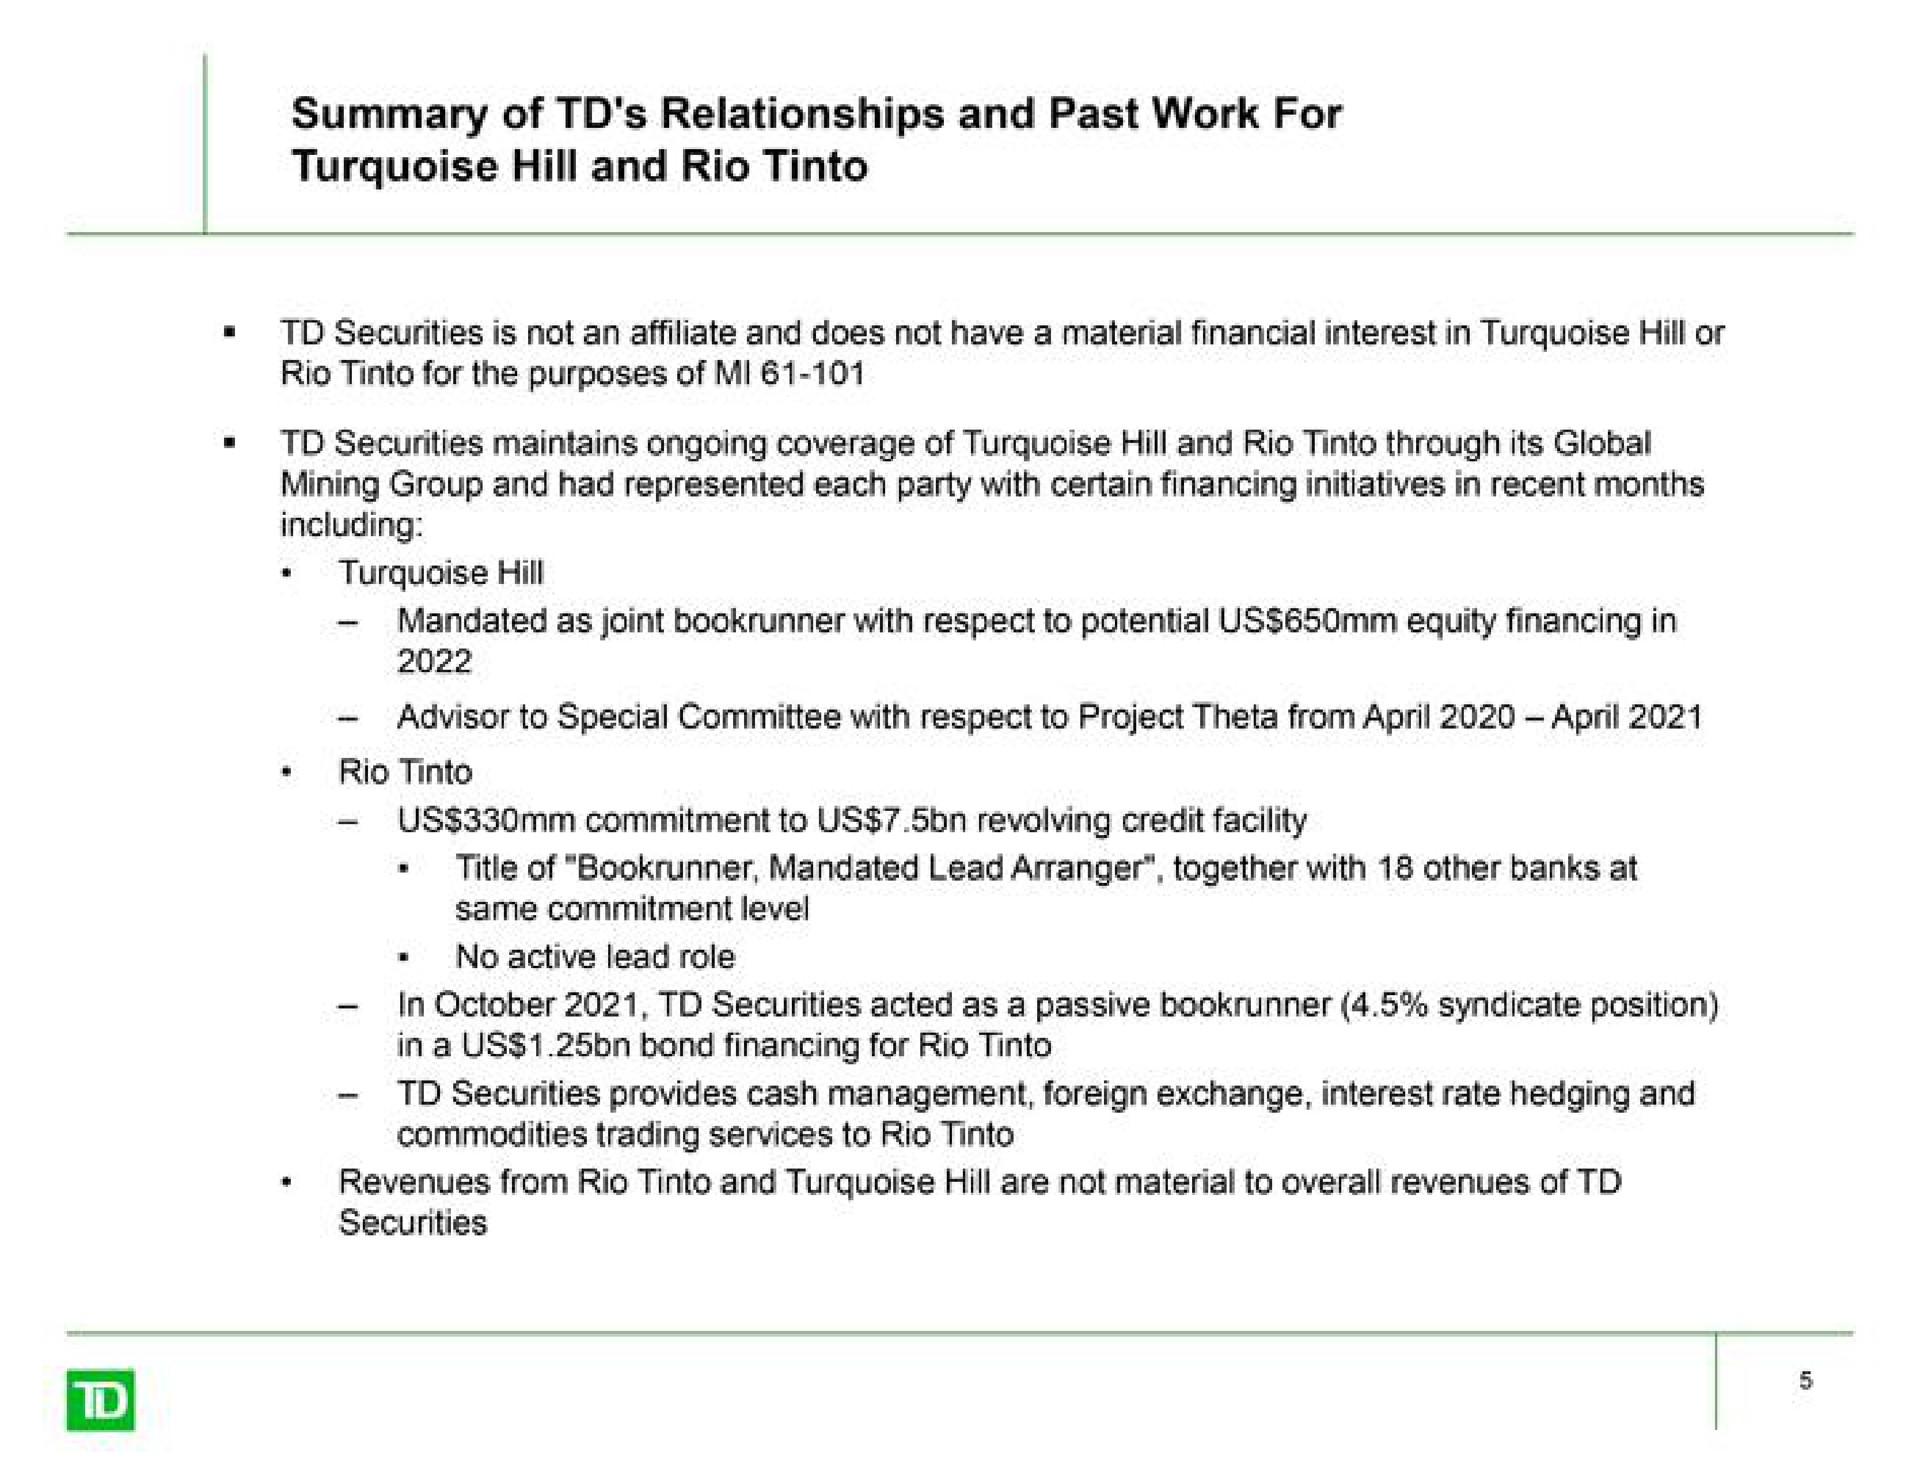 summary of relationships and past work for turquoise hill and rio | TD Securities